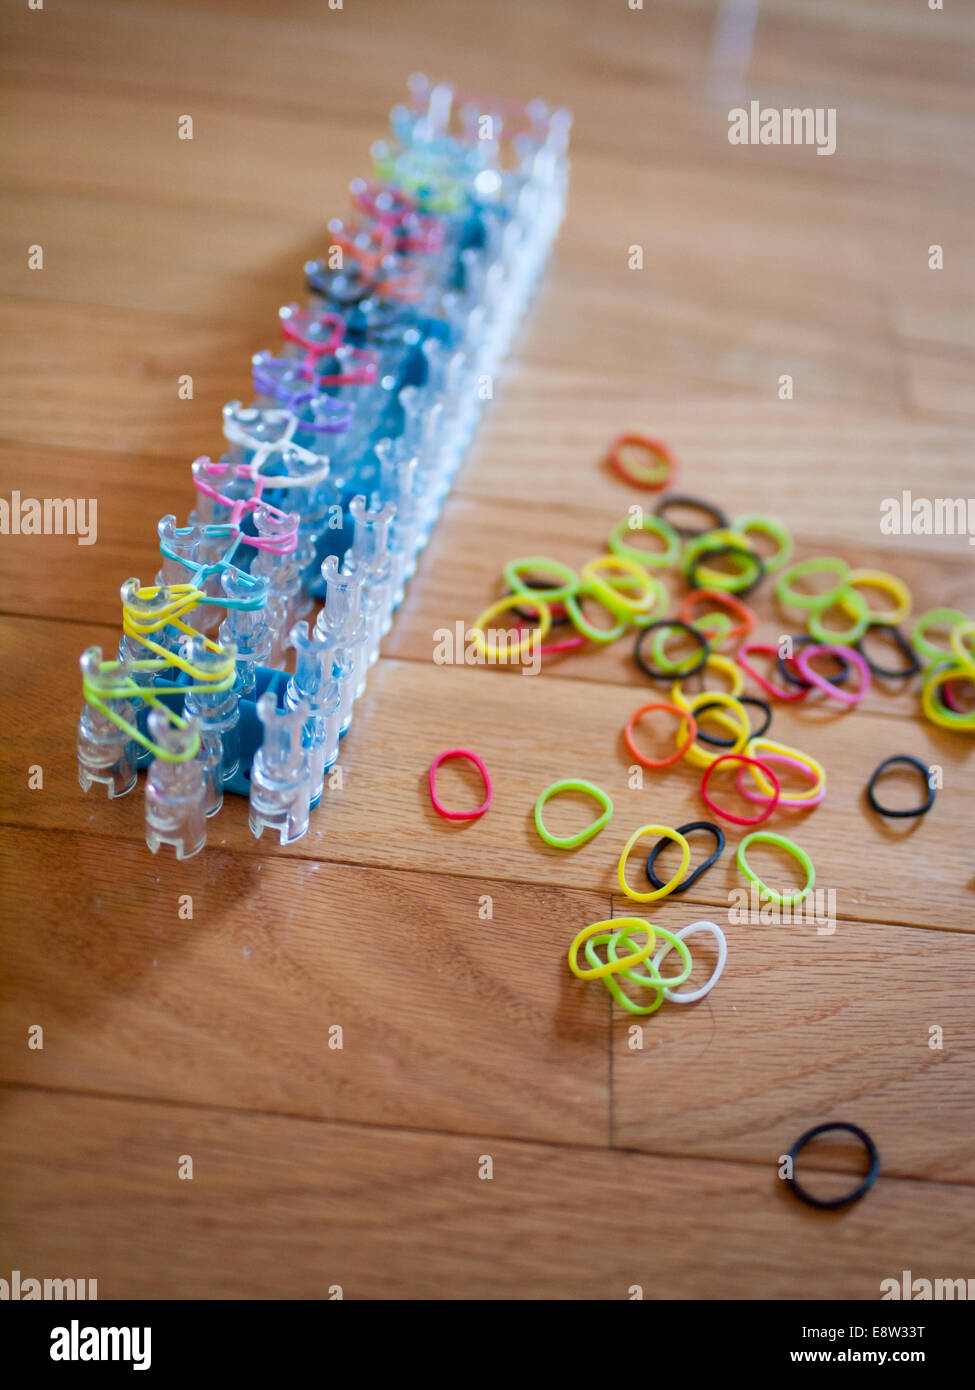 A Rainbow Loom and colourful rubber bands.  Rainbow loom is a plastic loom used to weave rubber bands into bracelets and charms. Stock Photo